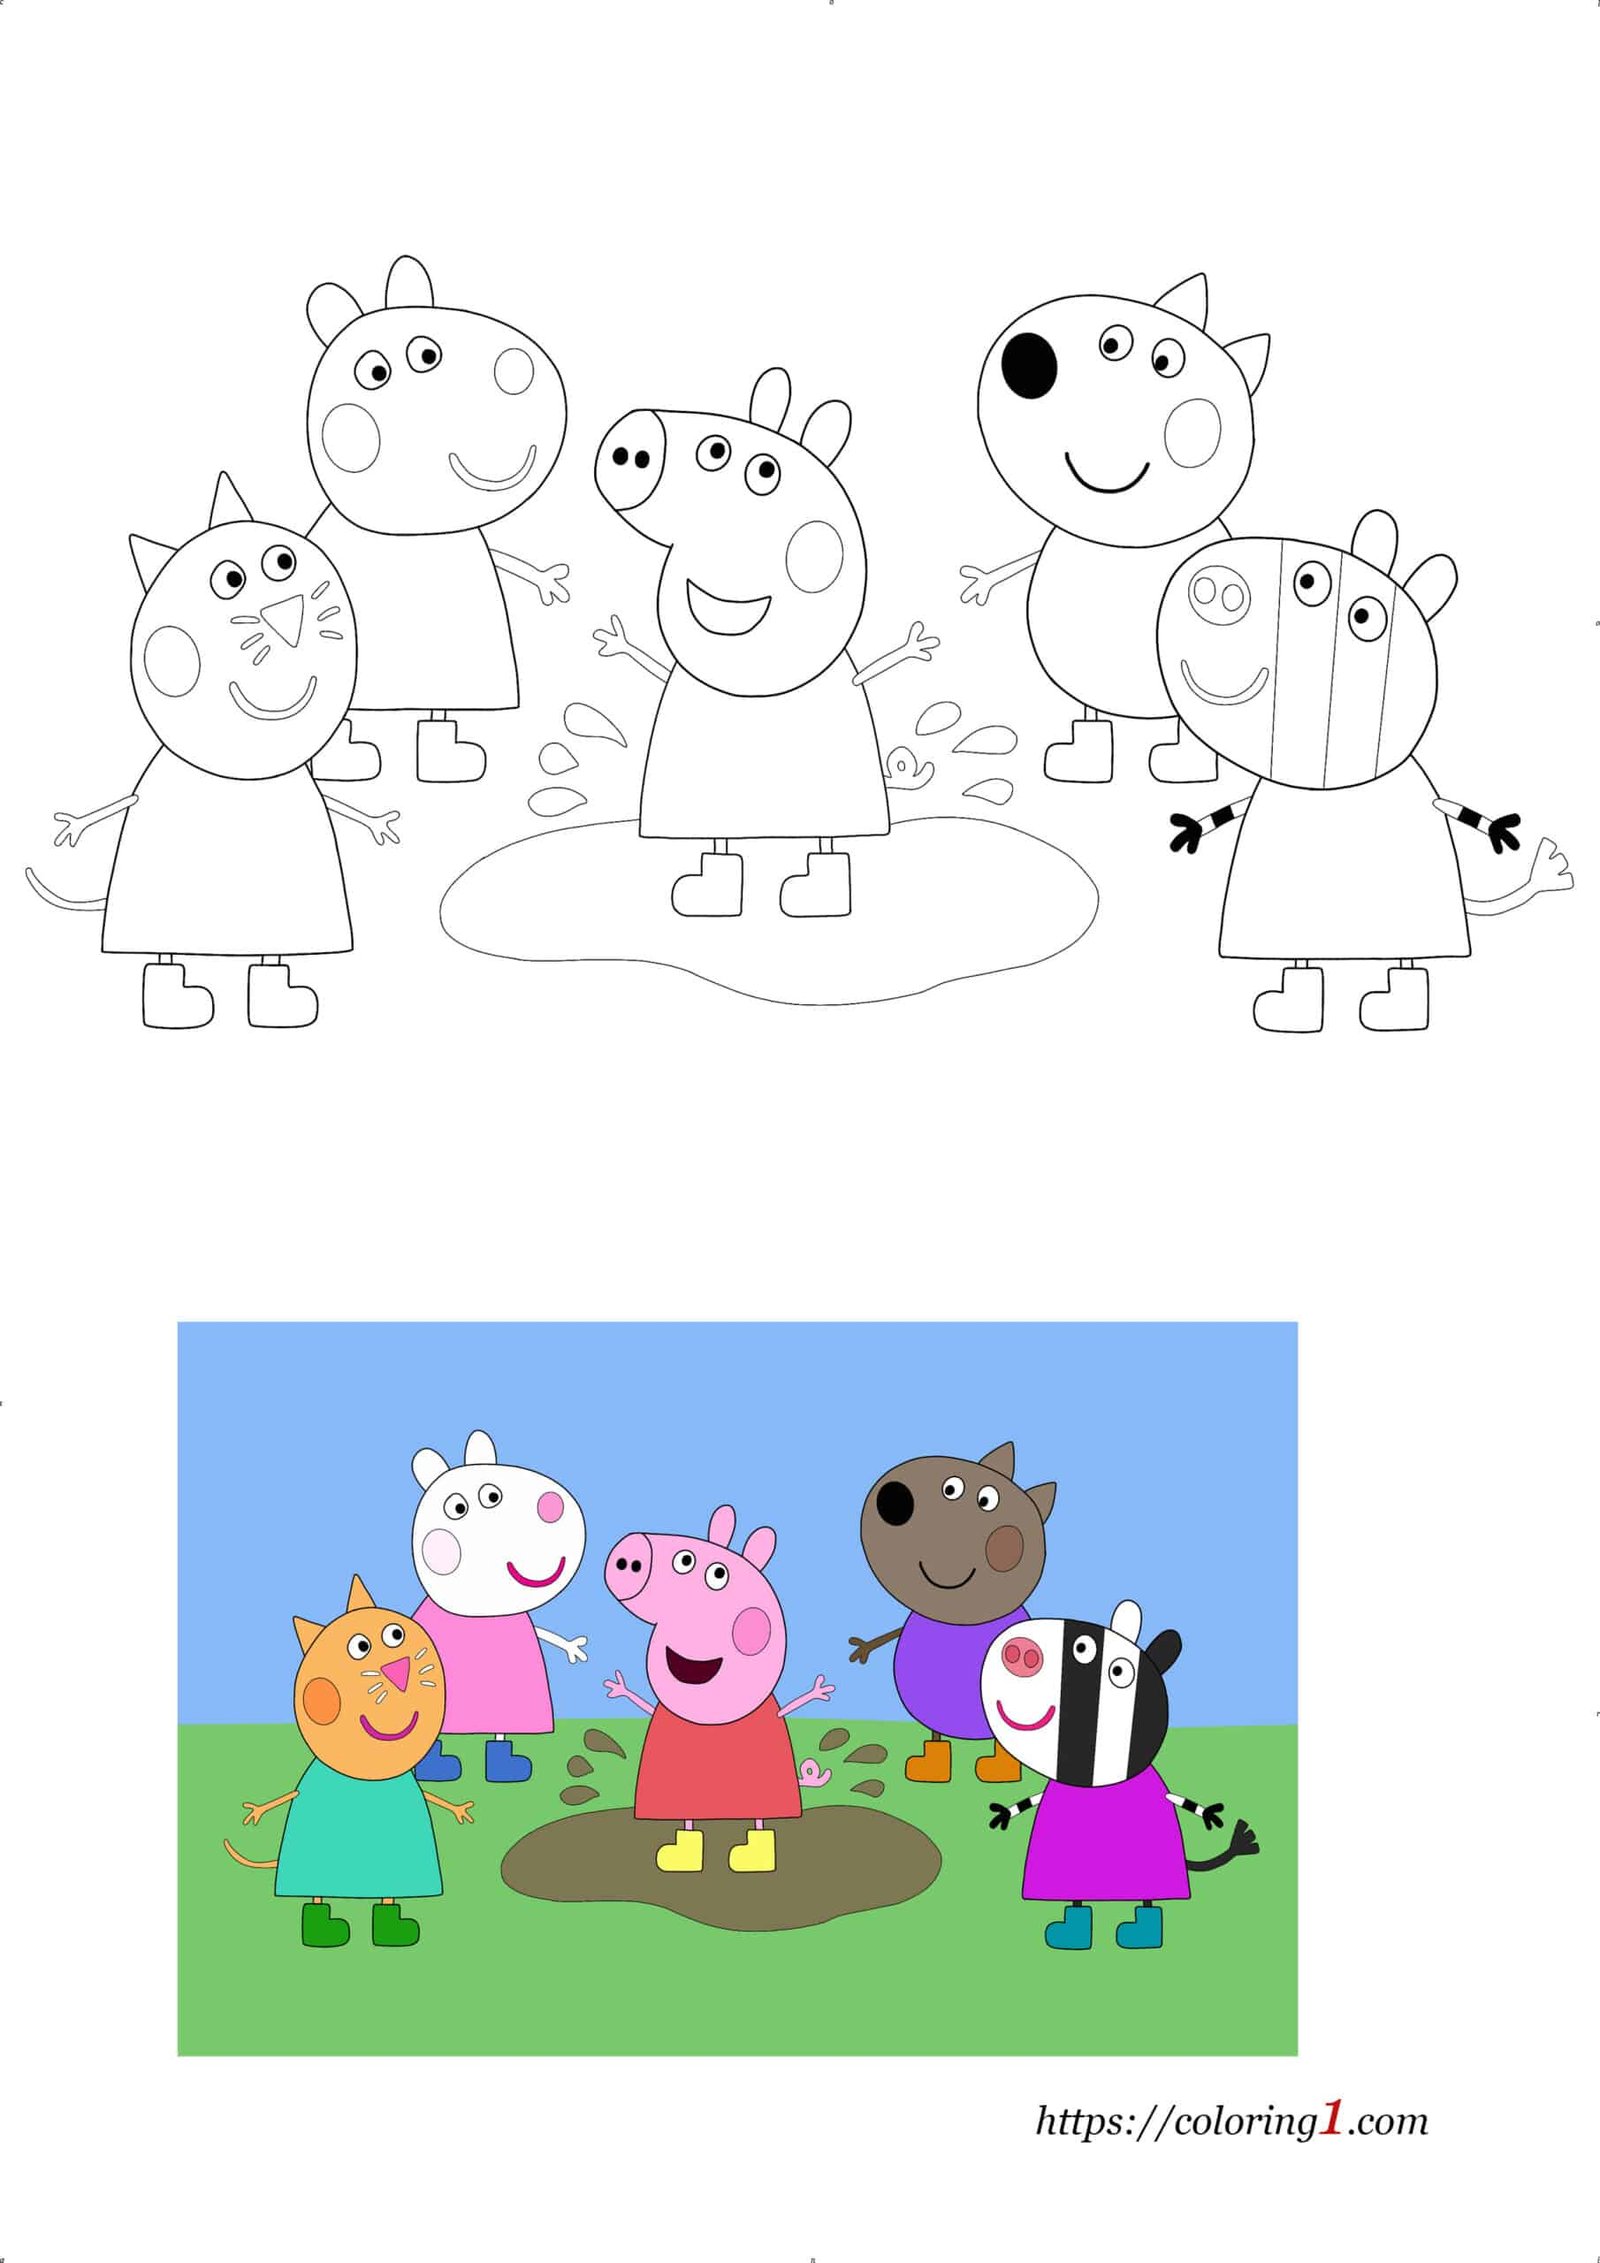 Peppa Pig And Friends colouring page to print